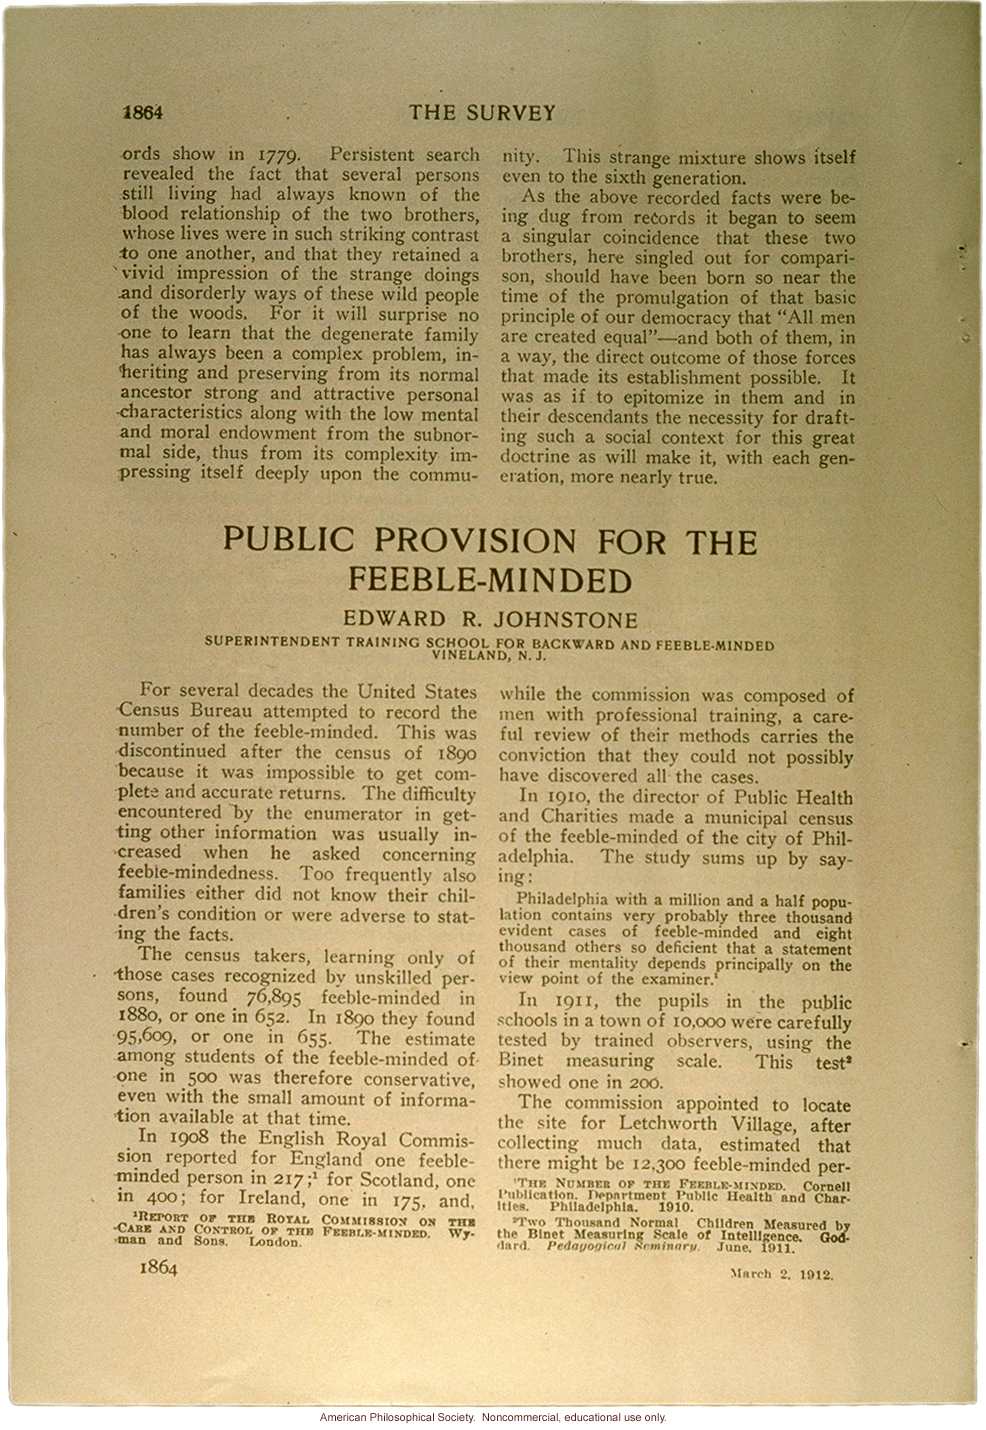 &quote;Public provision for the feeble-minded,&quote; by Edward Johnstone